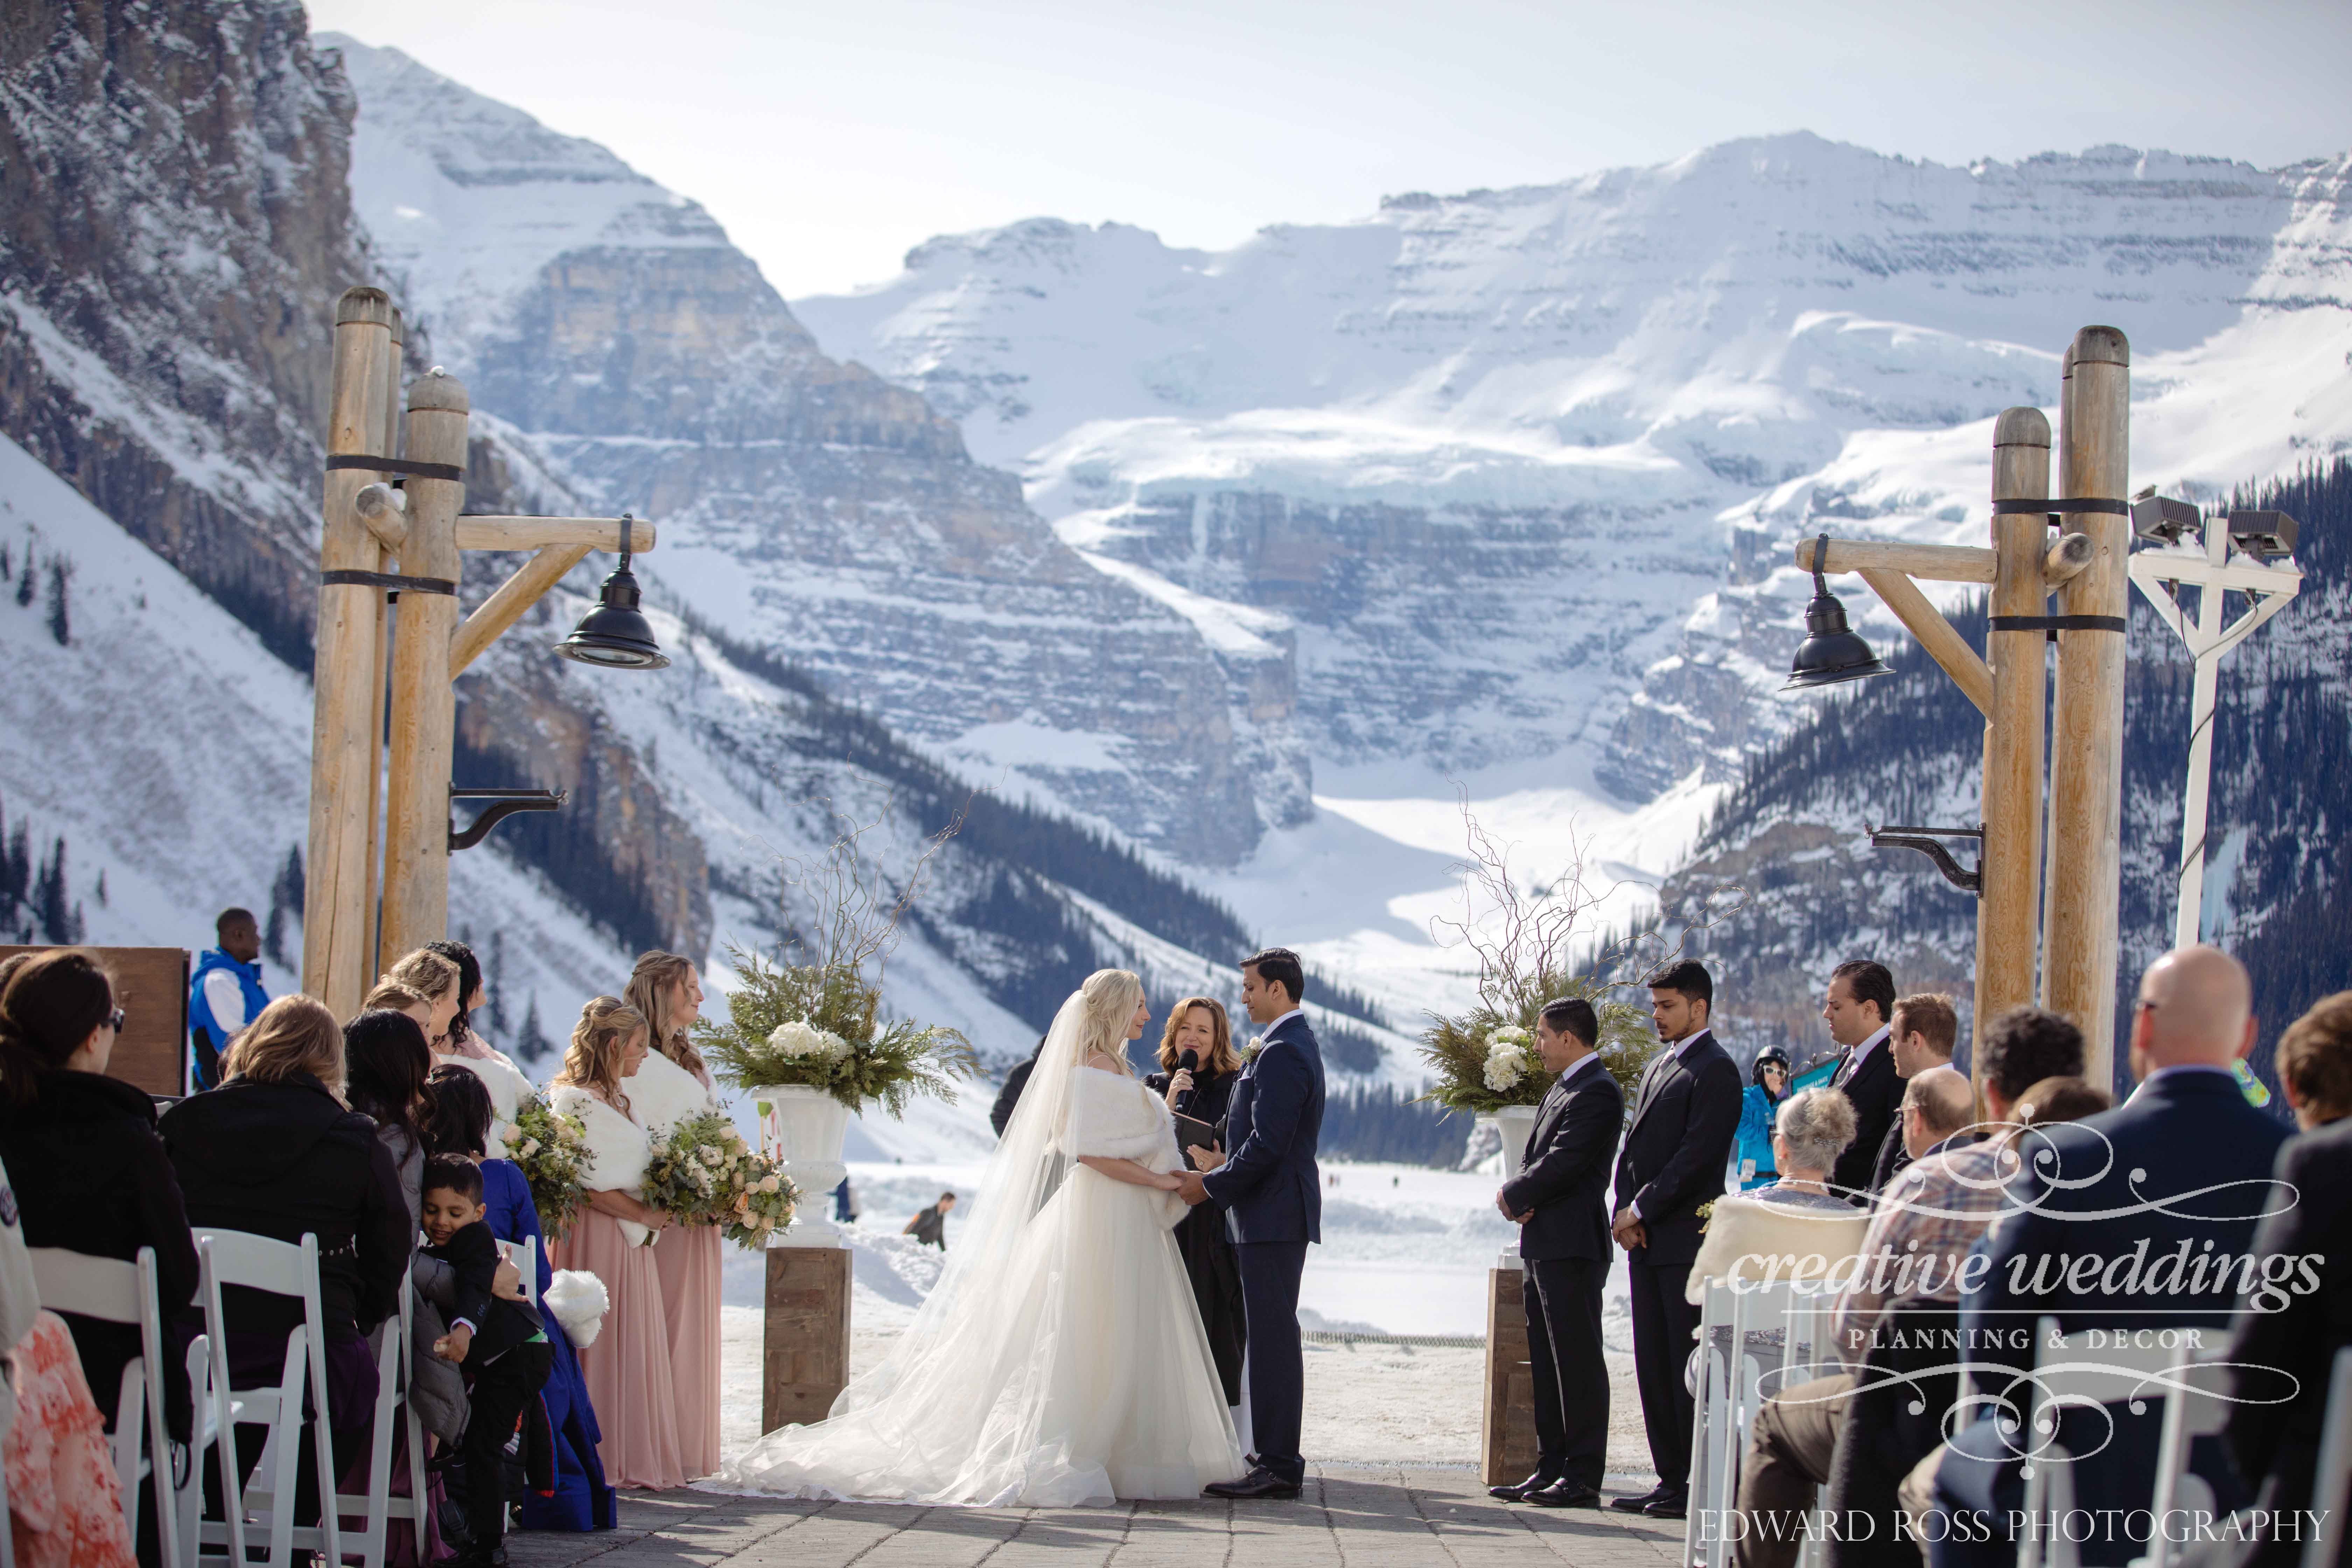 Canadian Wedding Inspiration & Planning Resources